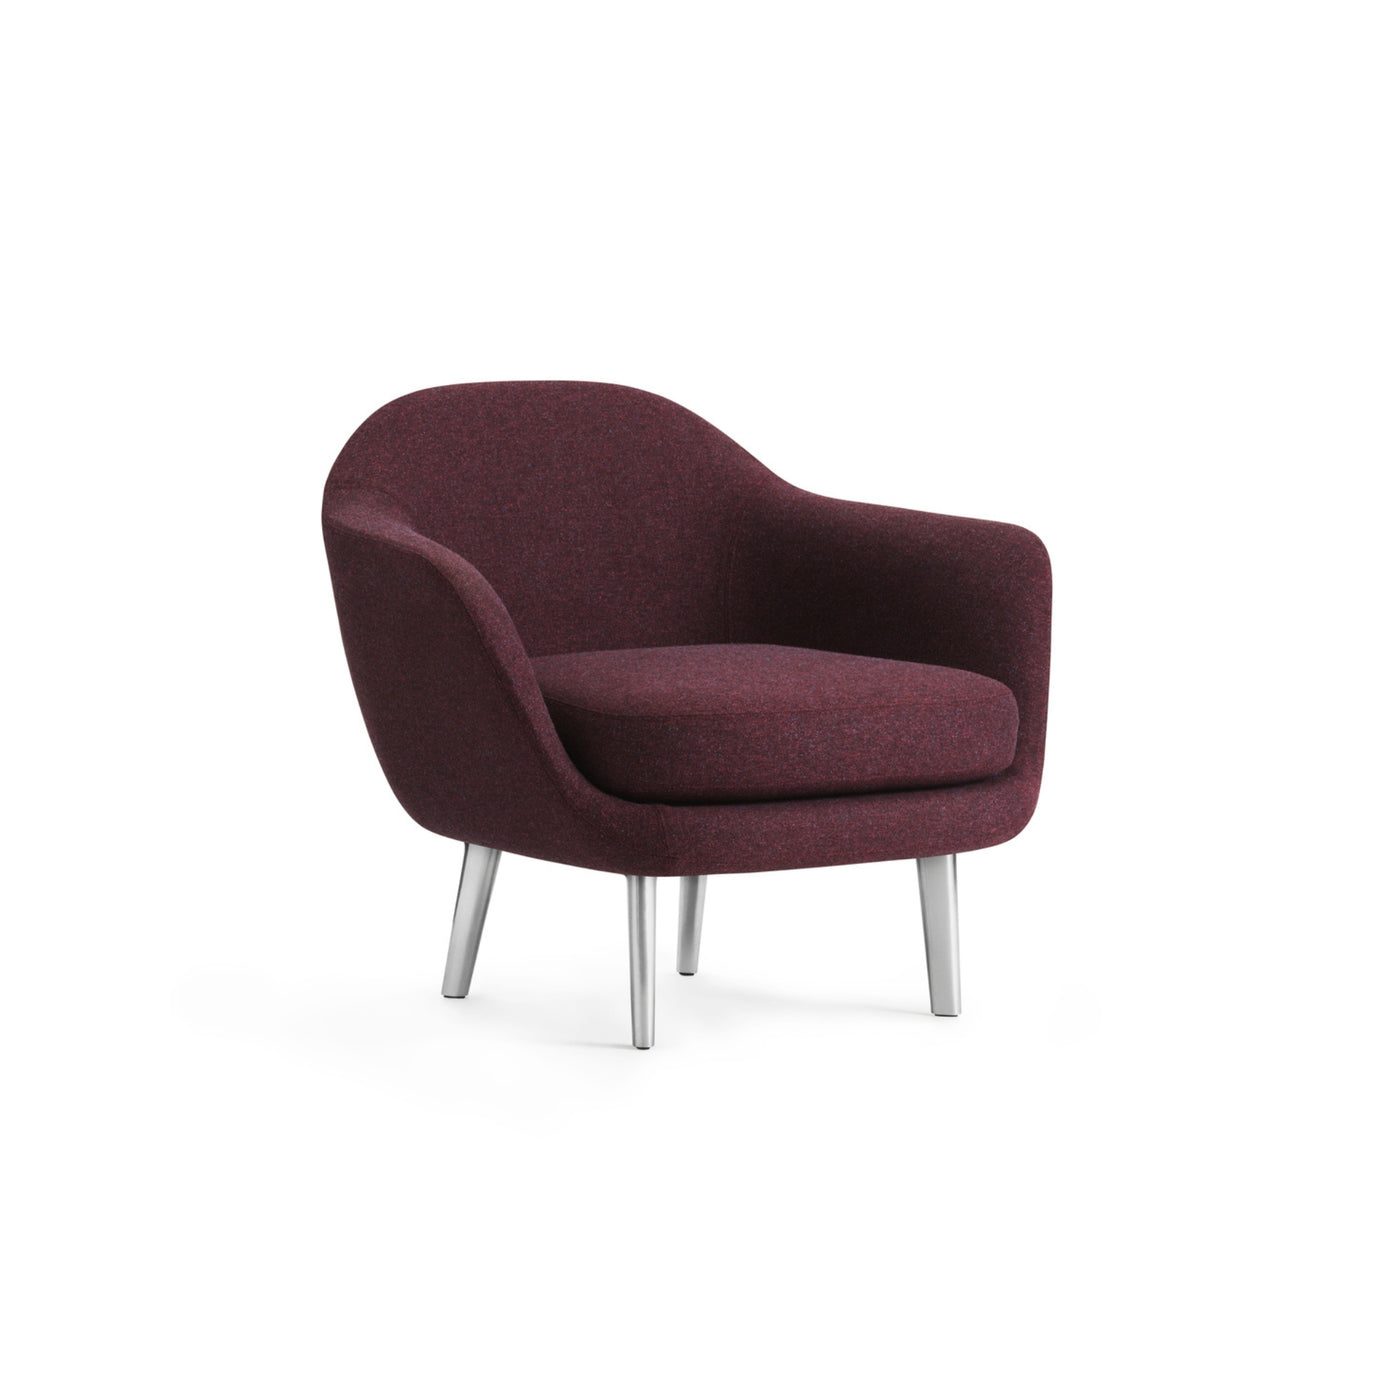 Normann Copenhagen Sum Armchair. Made to order at someday designs. #colour_main-line-flax-northfield